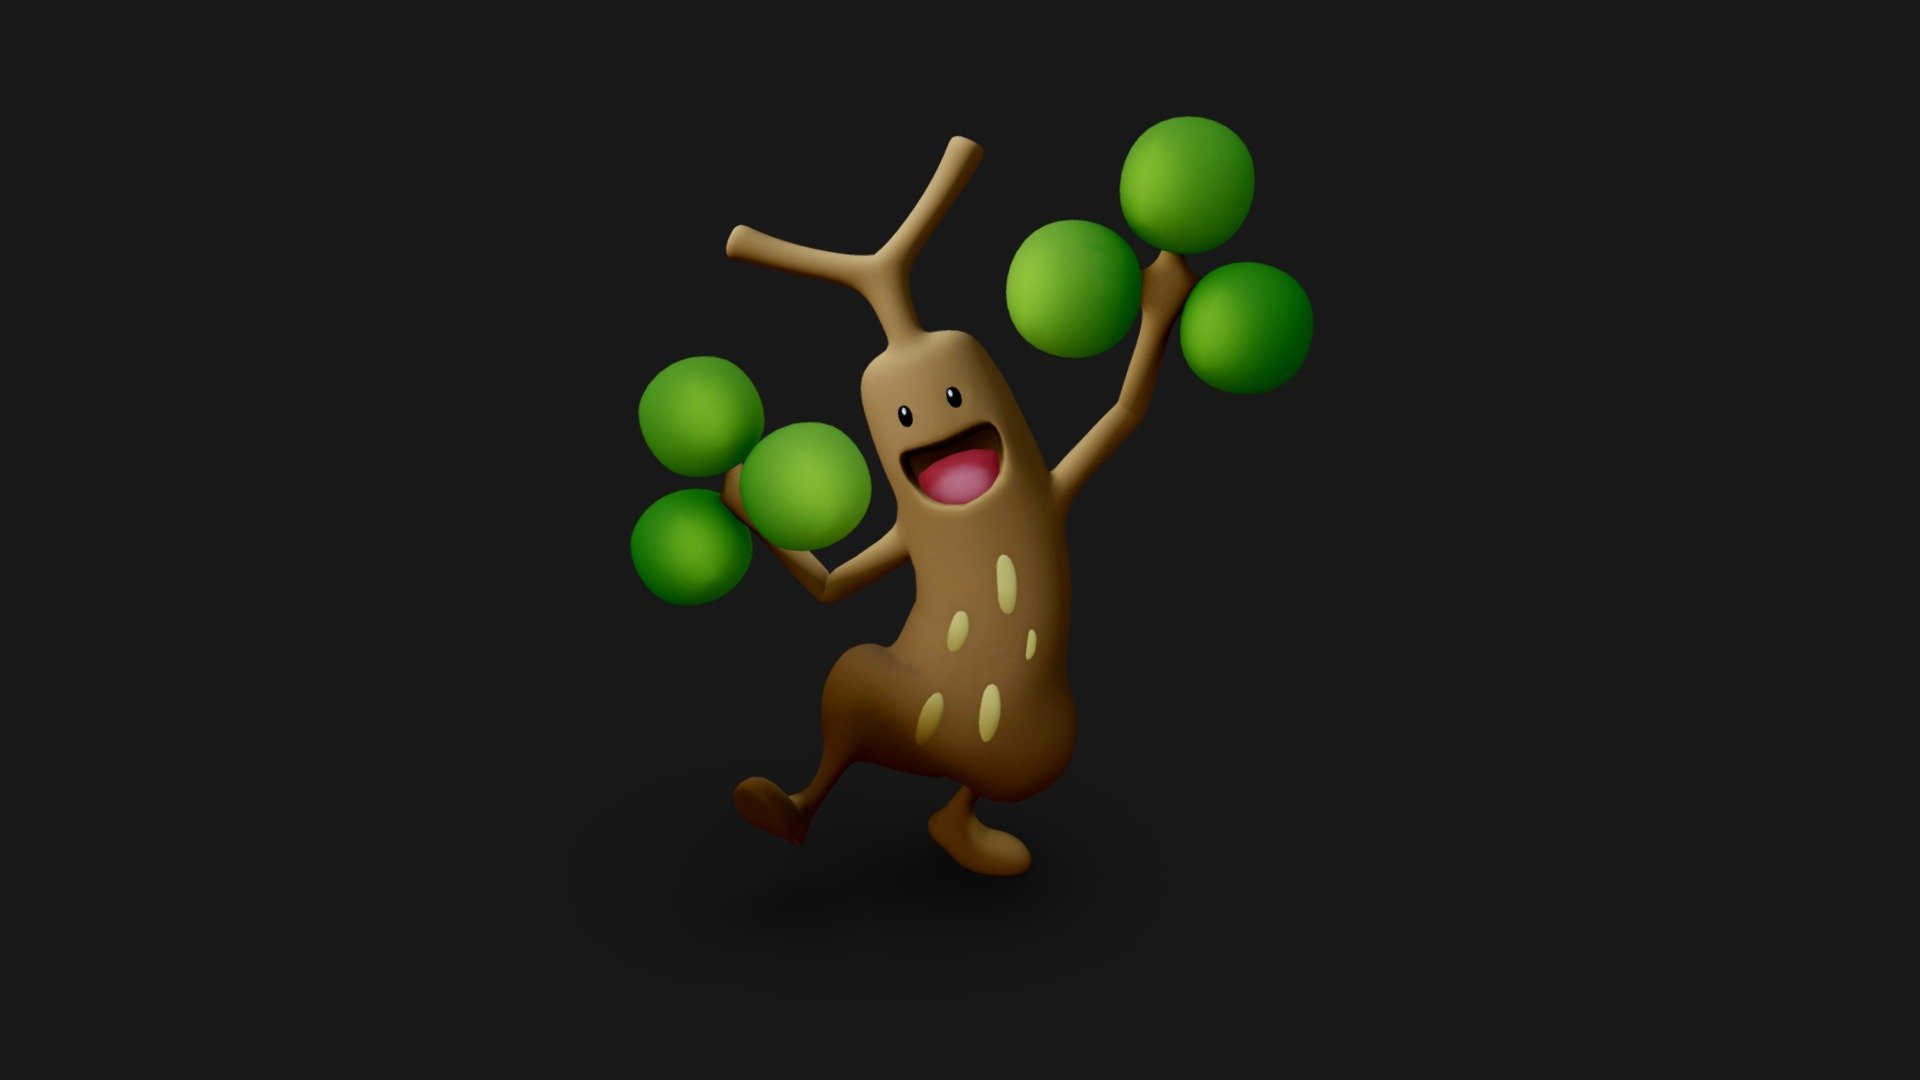 This little Sudovodoo will be my tree for the weekly challenge.
Please note: Might contain traces of stone.

[Sudowoodo sounds kinda wild, in Germany we call it Mogelbaum] ^^'

Model: Blender
Texture: Substance Painter

From Sketchfab Weekly Challenge Prompt


2 - Tree - Pokemon Sudowoodo - Tree - Download Free 3D model by kuayarts 3d model